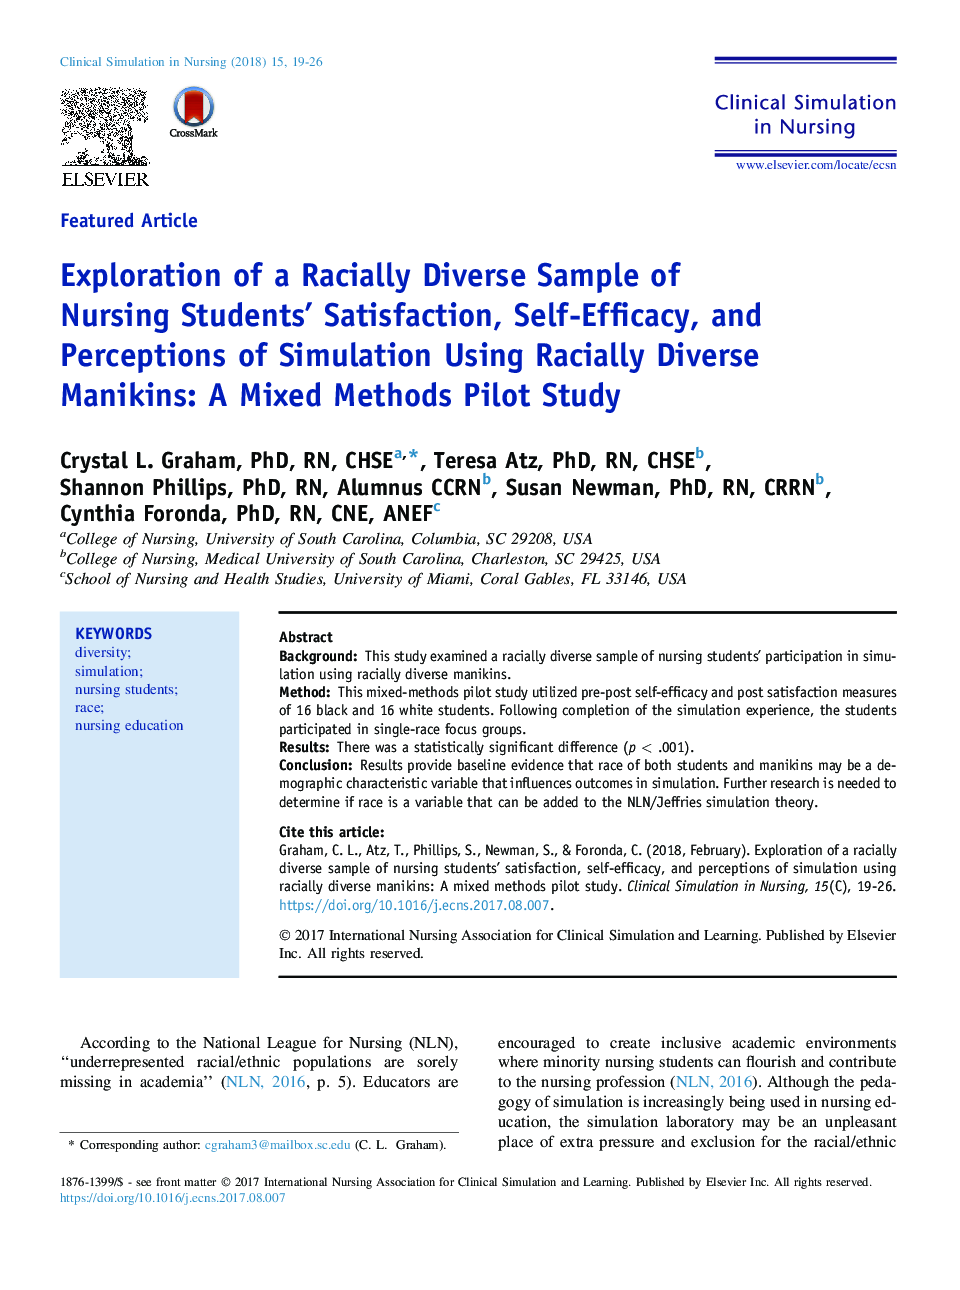 Exploration of a Racially Diverse Sample of Nursing Students' Satisfaction, Self-Efficacy, and Perceptions of Simulation Using Racially Diverse Manikins: A Mixed Methods Pilot Study